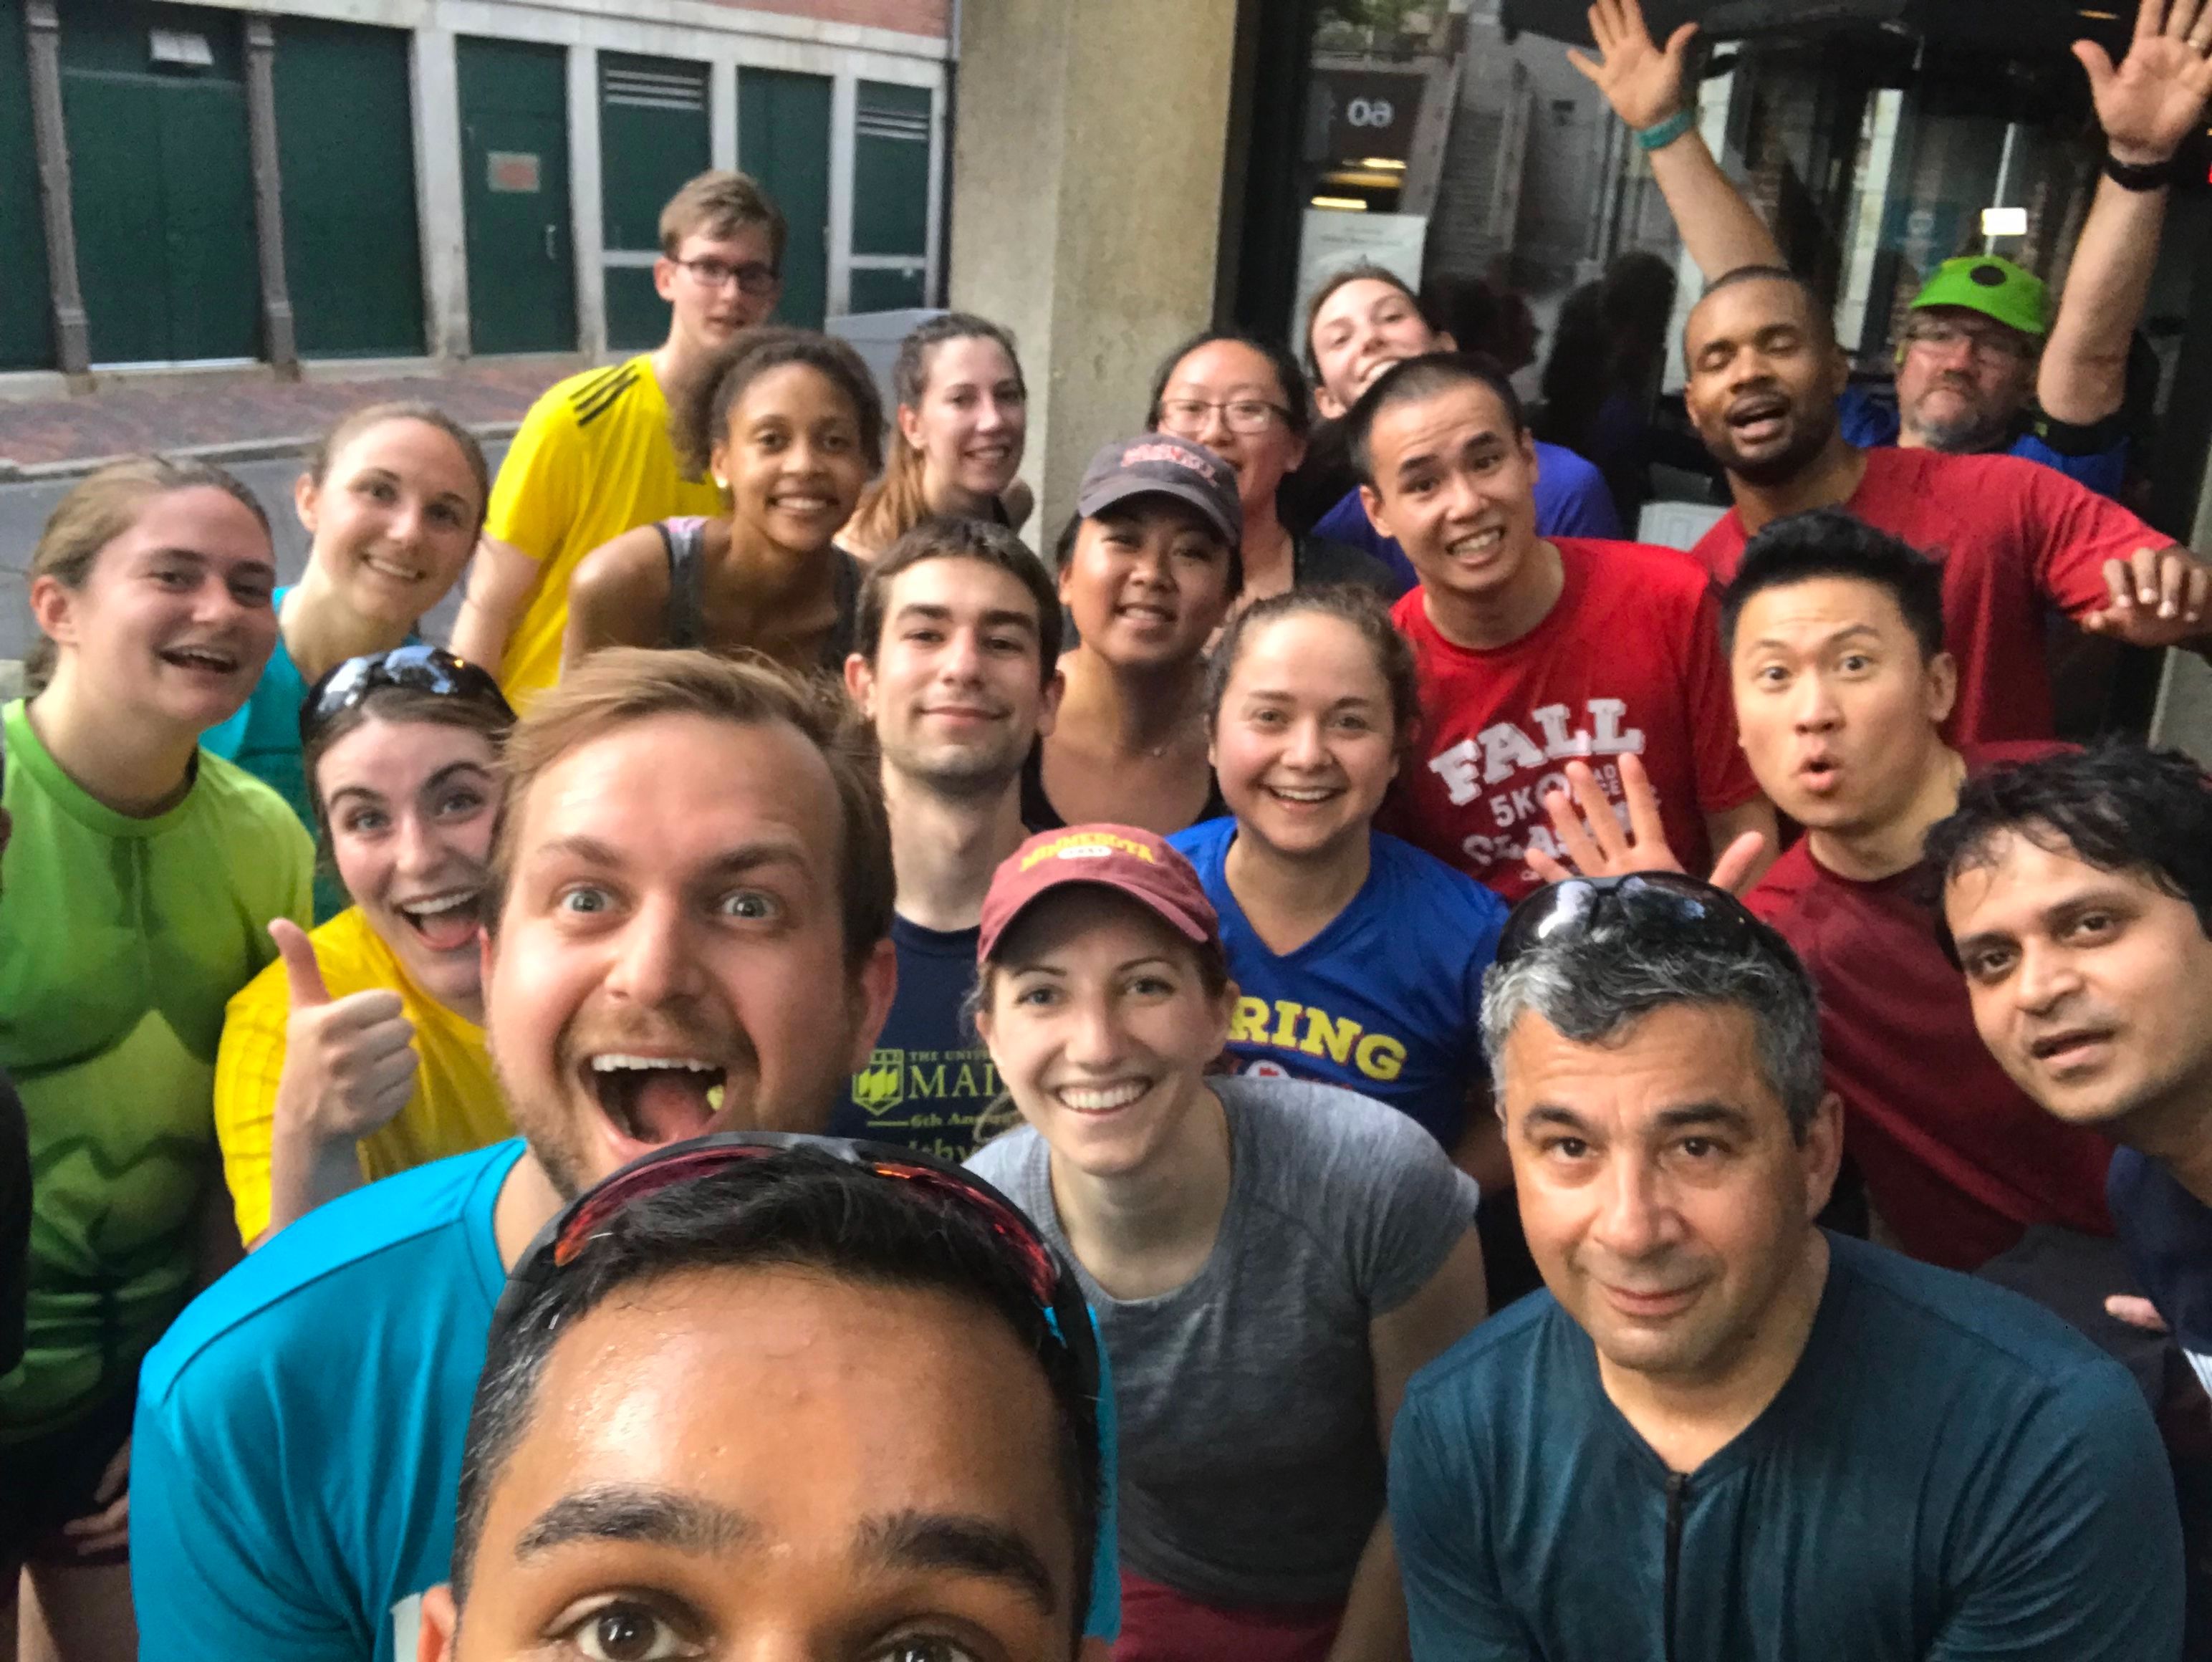 Group photo following one of the recent, “Will Run For Beer” events